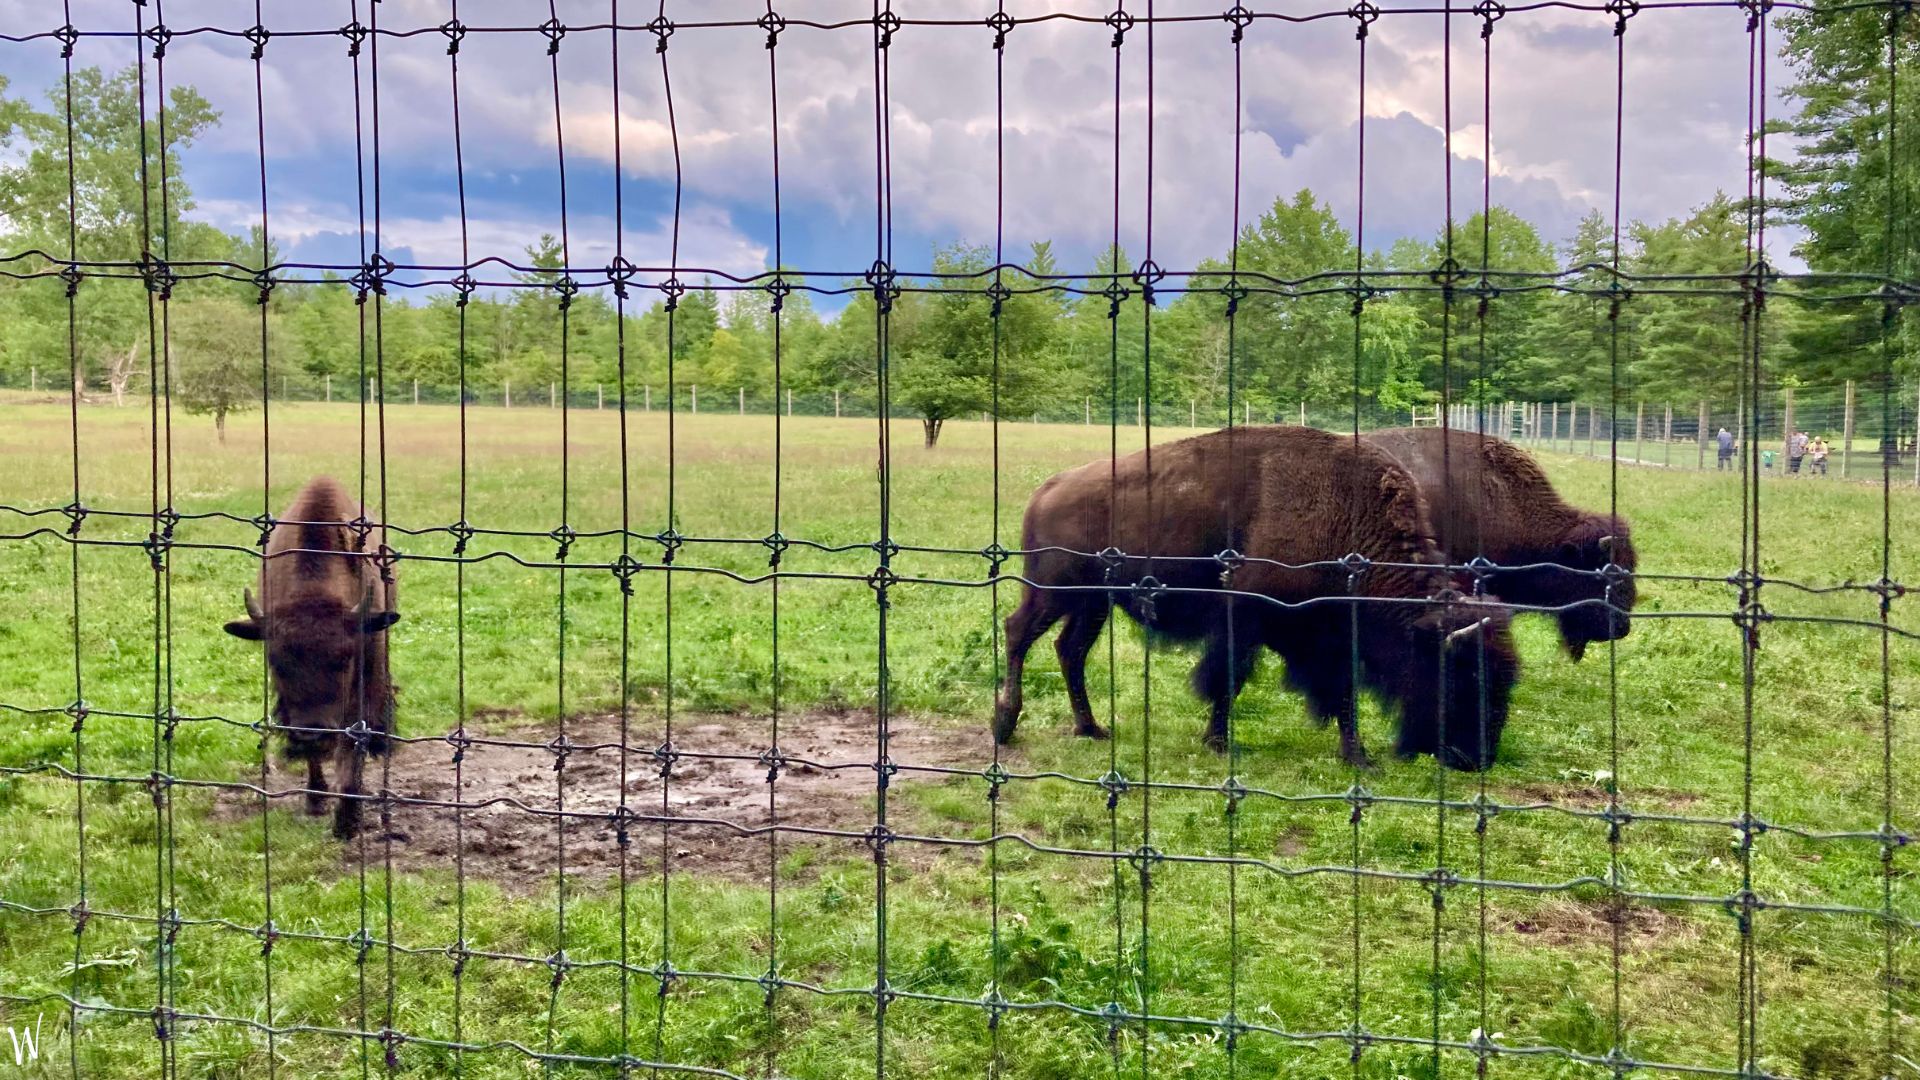 Bison roaming behind a fence at Ouabache State Park (Indiana)